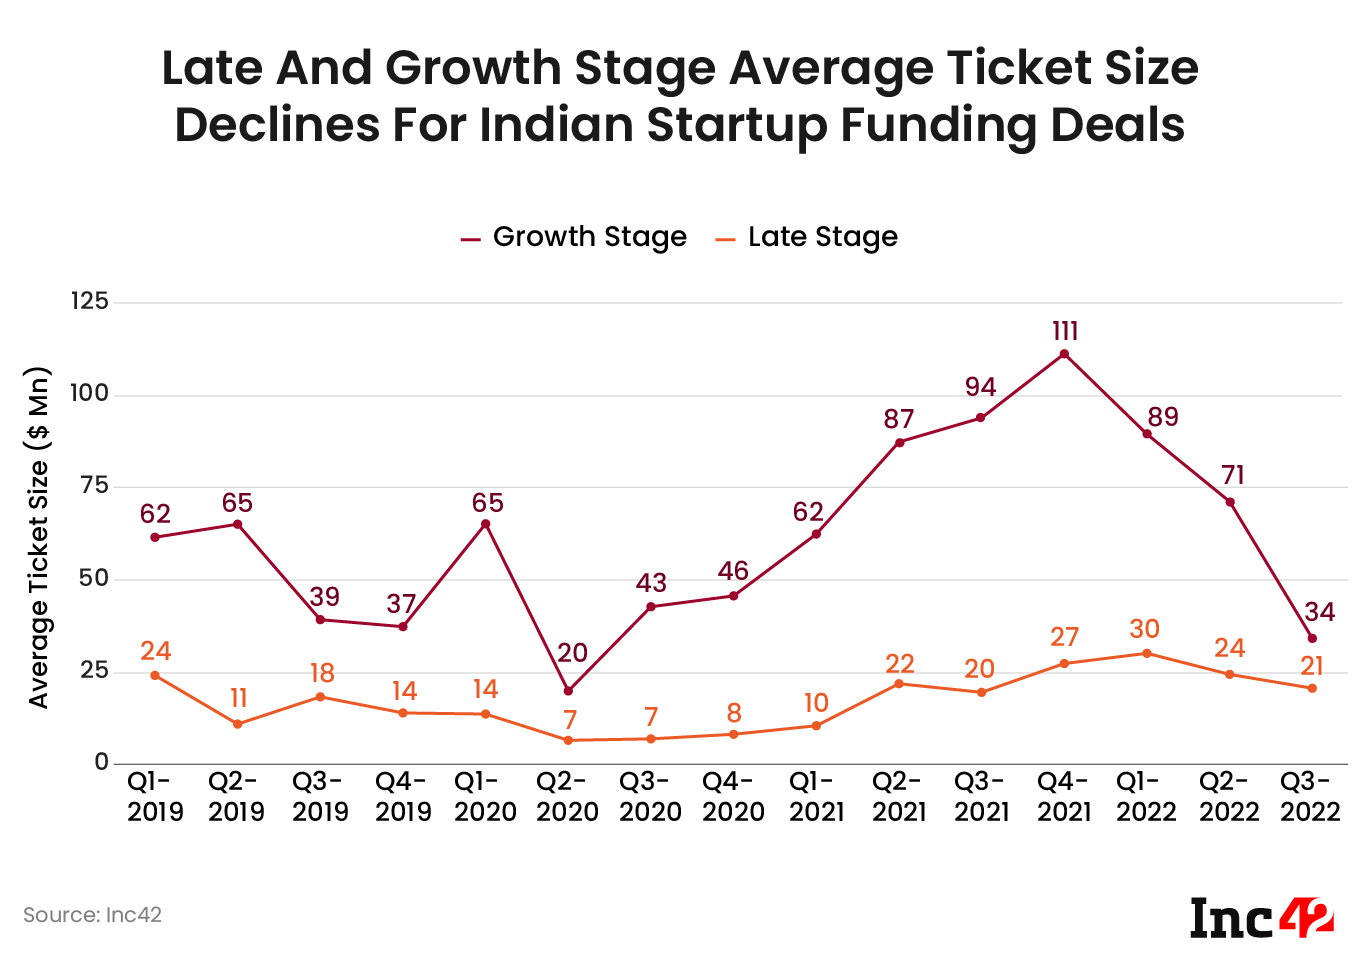 Late and growth stage average ticket size declines for Indian startup funding deals